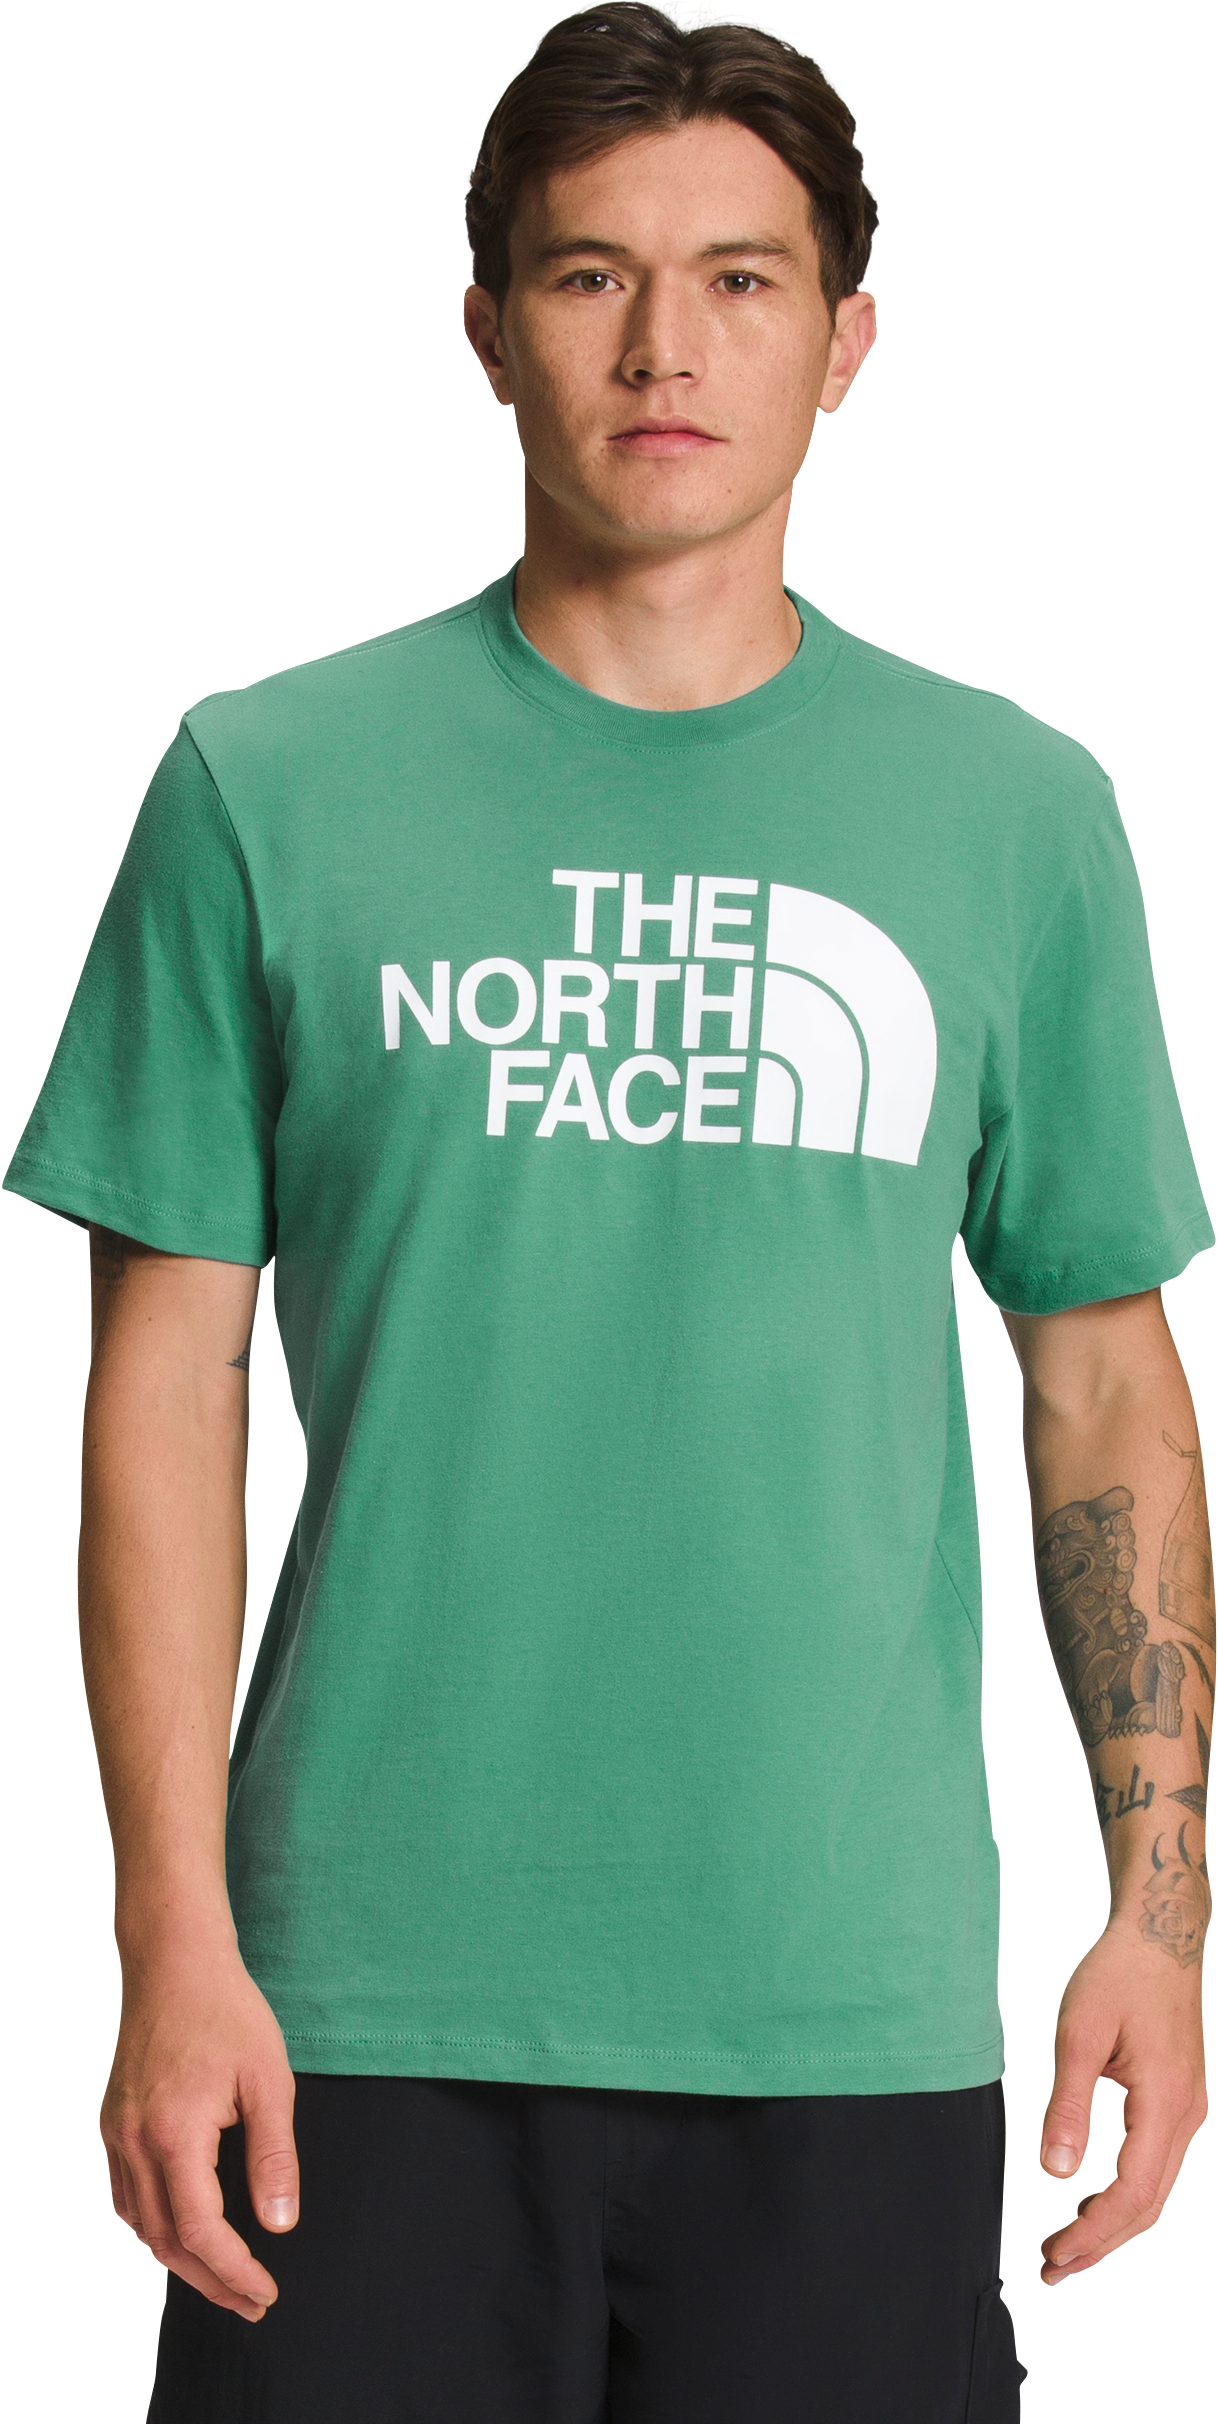 The North Face Half Dome Short-Sleeve T-Shirt for Men - Deep Grass Green - M